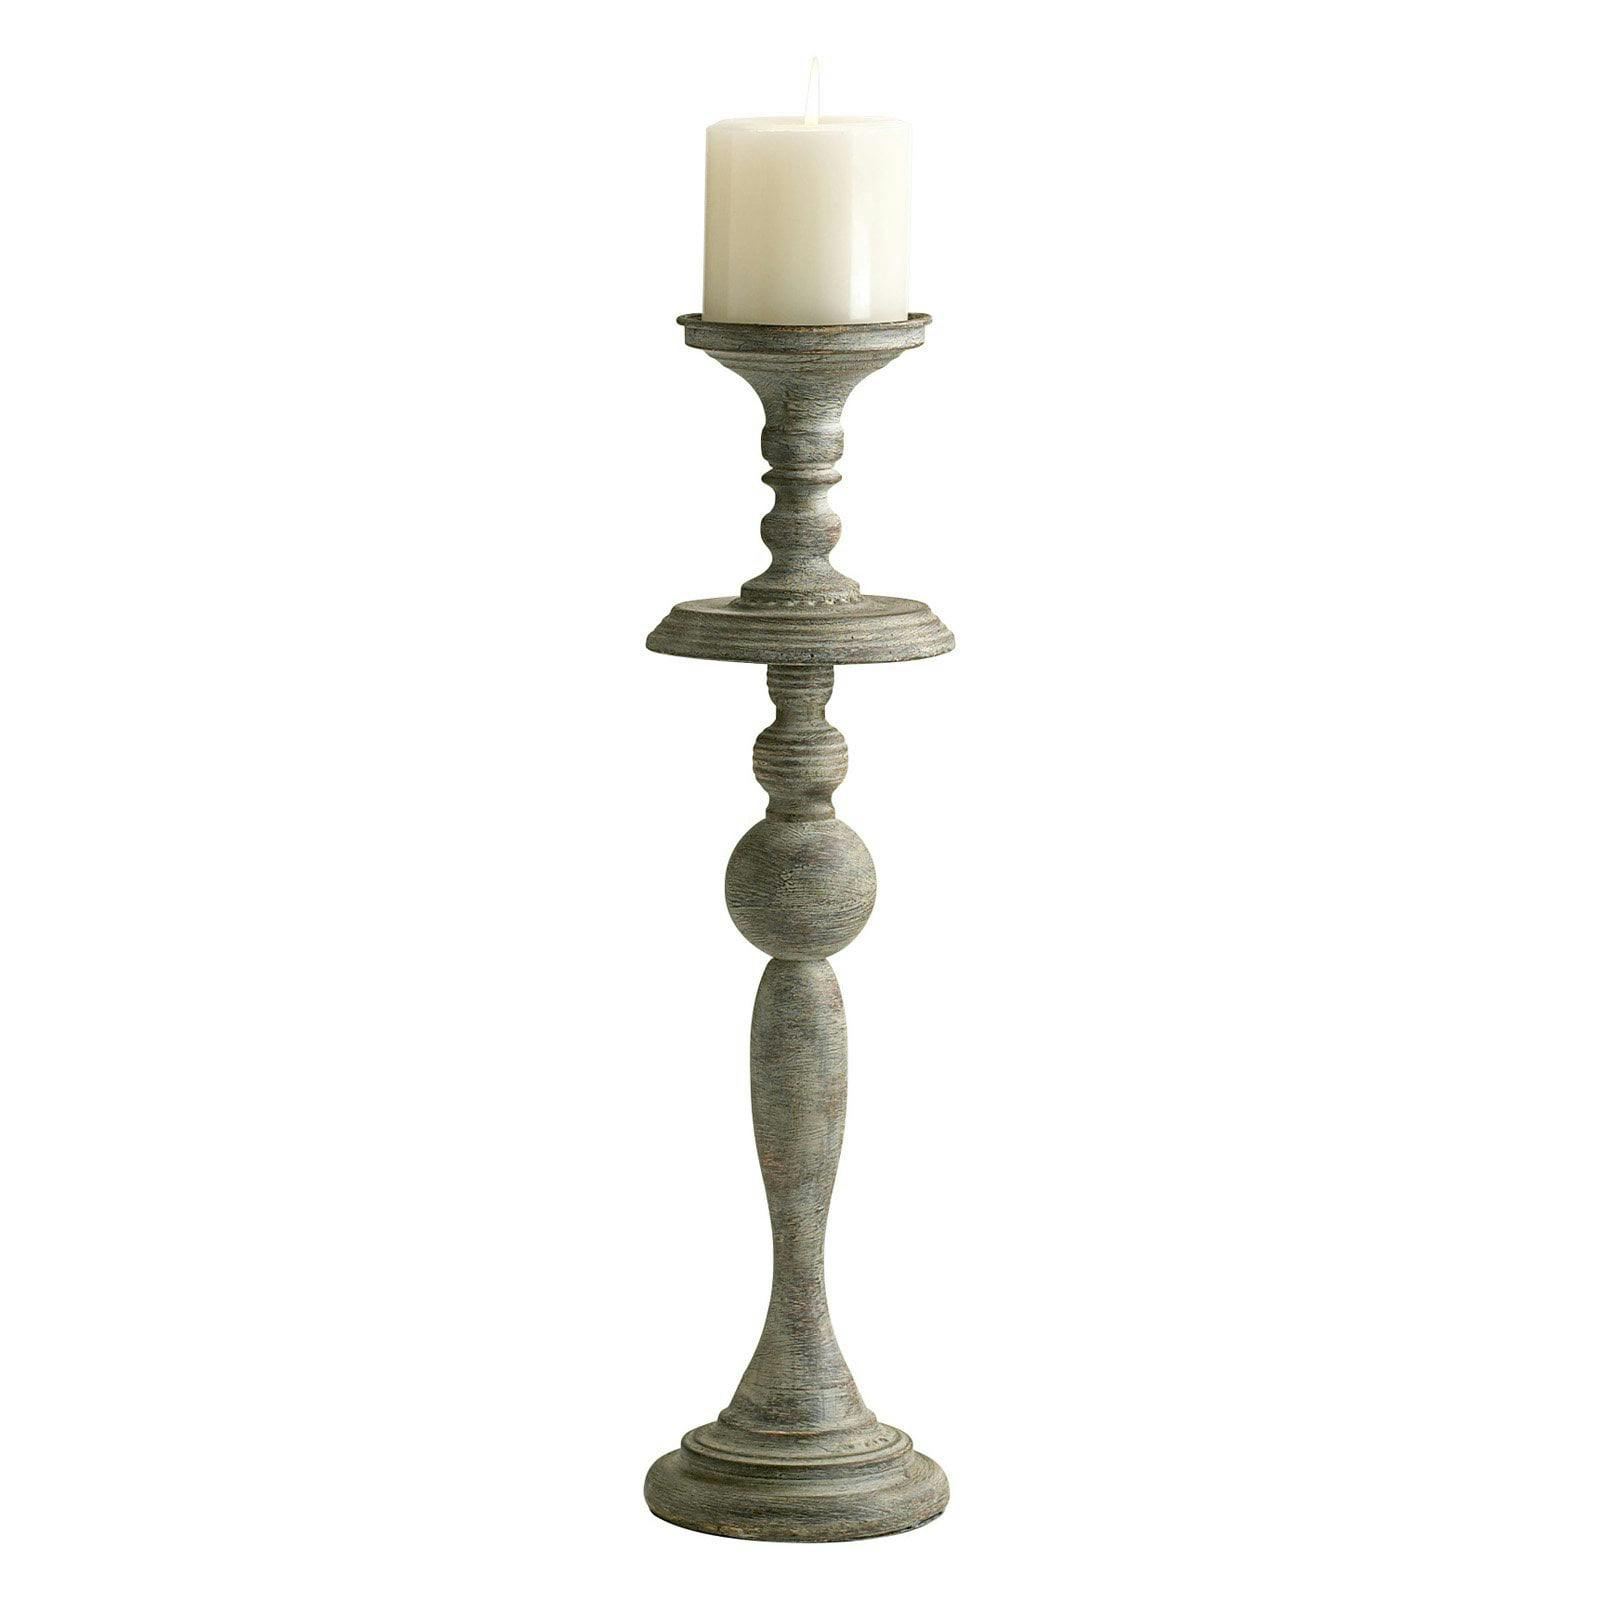 Distressed Antiqued White Iron Candlestick 23.25"